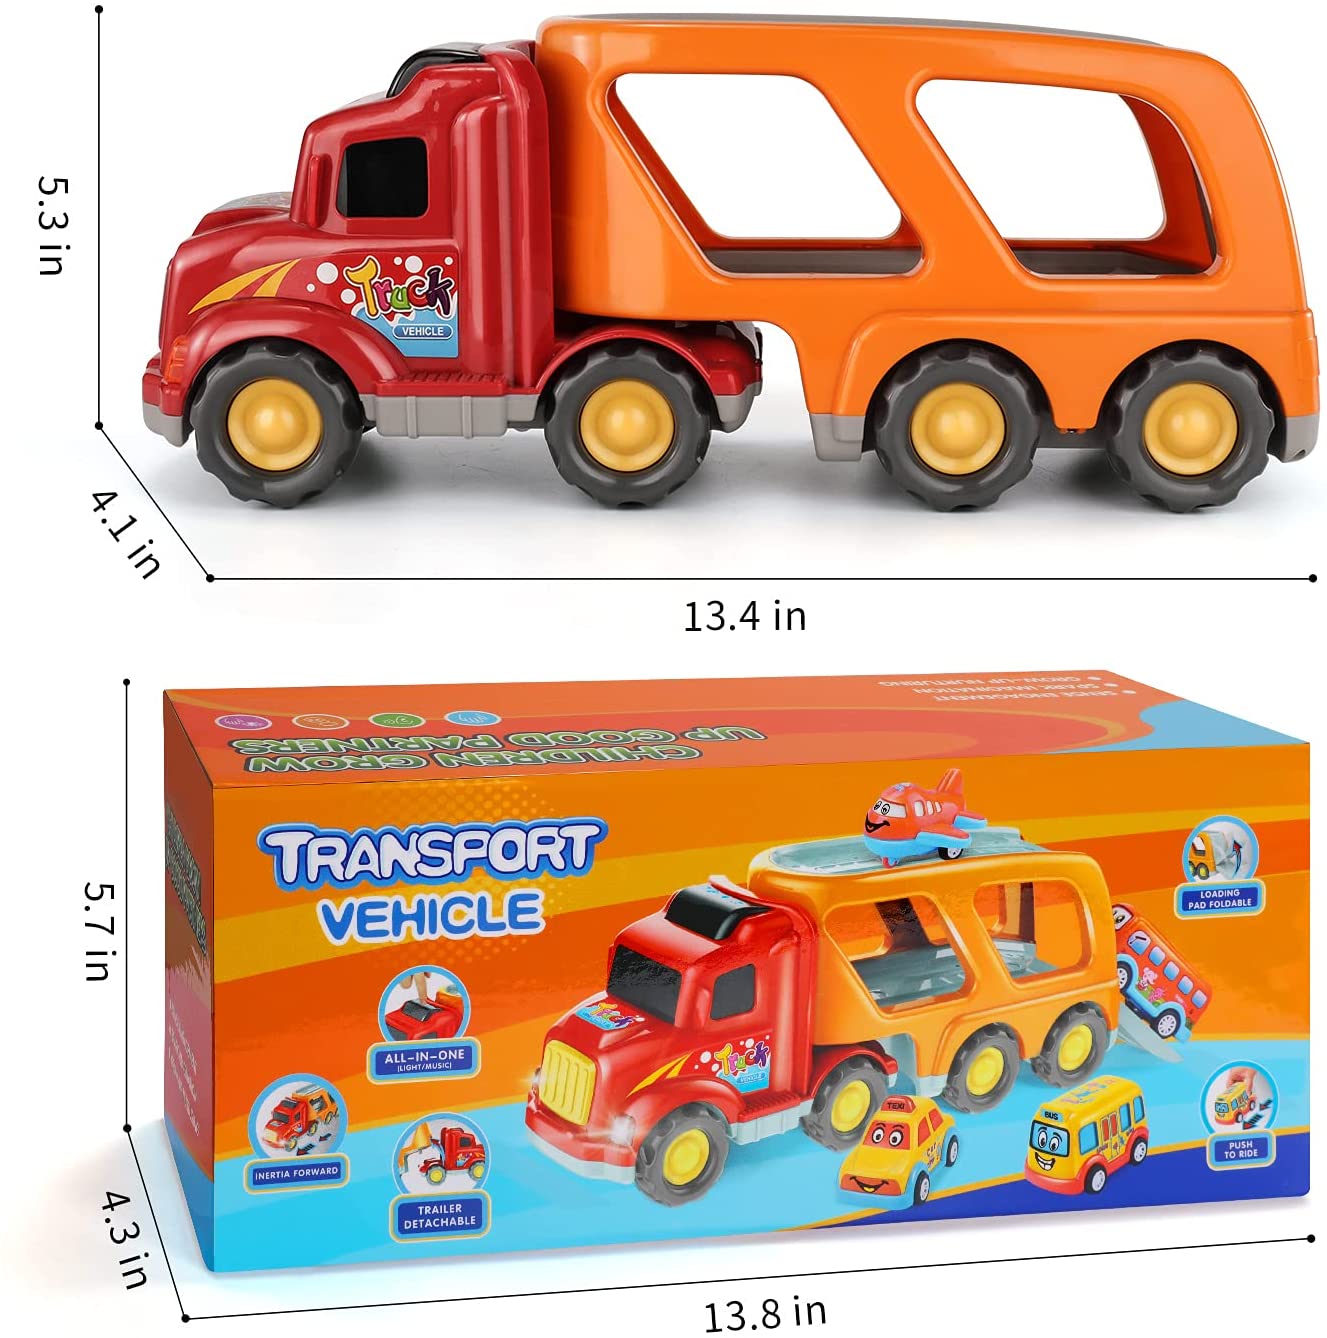 https://bigbigmart.com/wp-content/uploads/2021/12/Toys-for-1-2-3-4-5-6-Year-Old-Boys5-i8n-1-Carrier-Truck-Transport-Car-Play-Vehicles-Toys-Toddler-Boy-Toys-for-Girls-Kids-Toddlers6.jpg